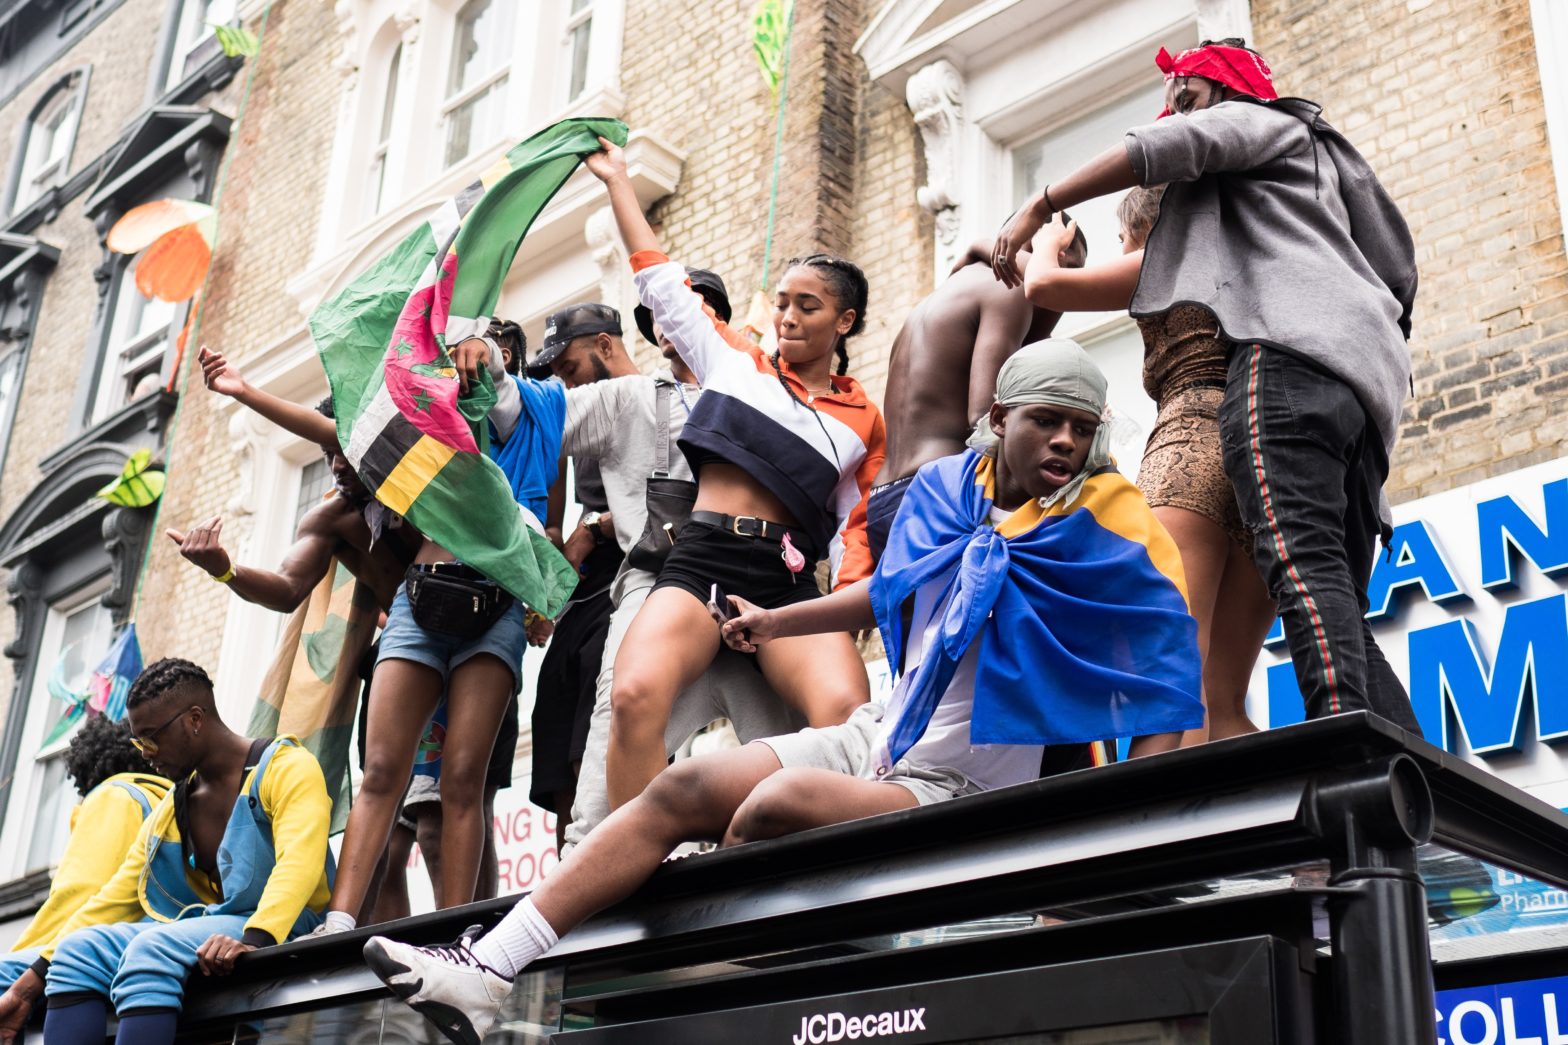 The Notting Hill Carnival In London Returns In-Person After Two Year Hiatus